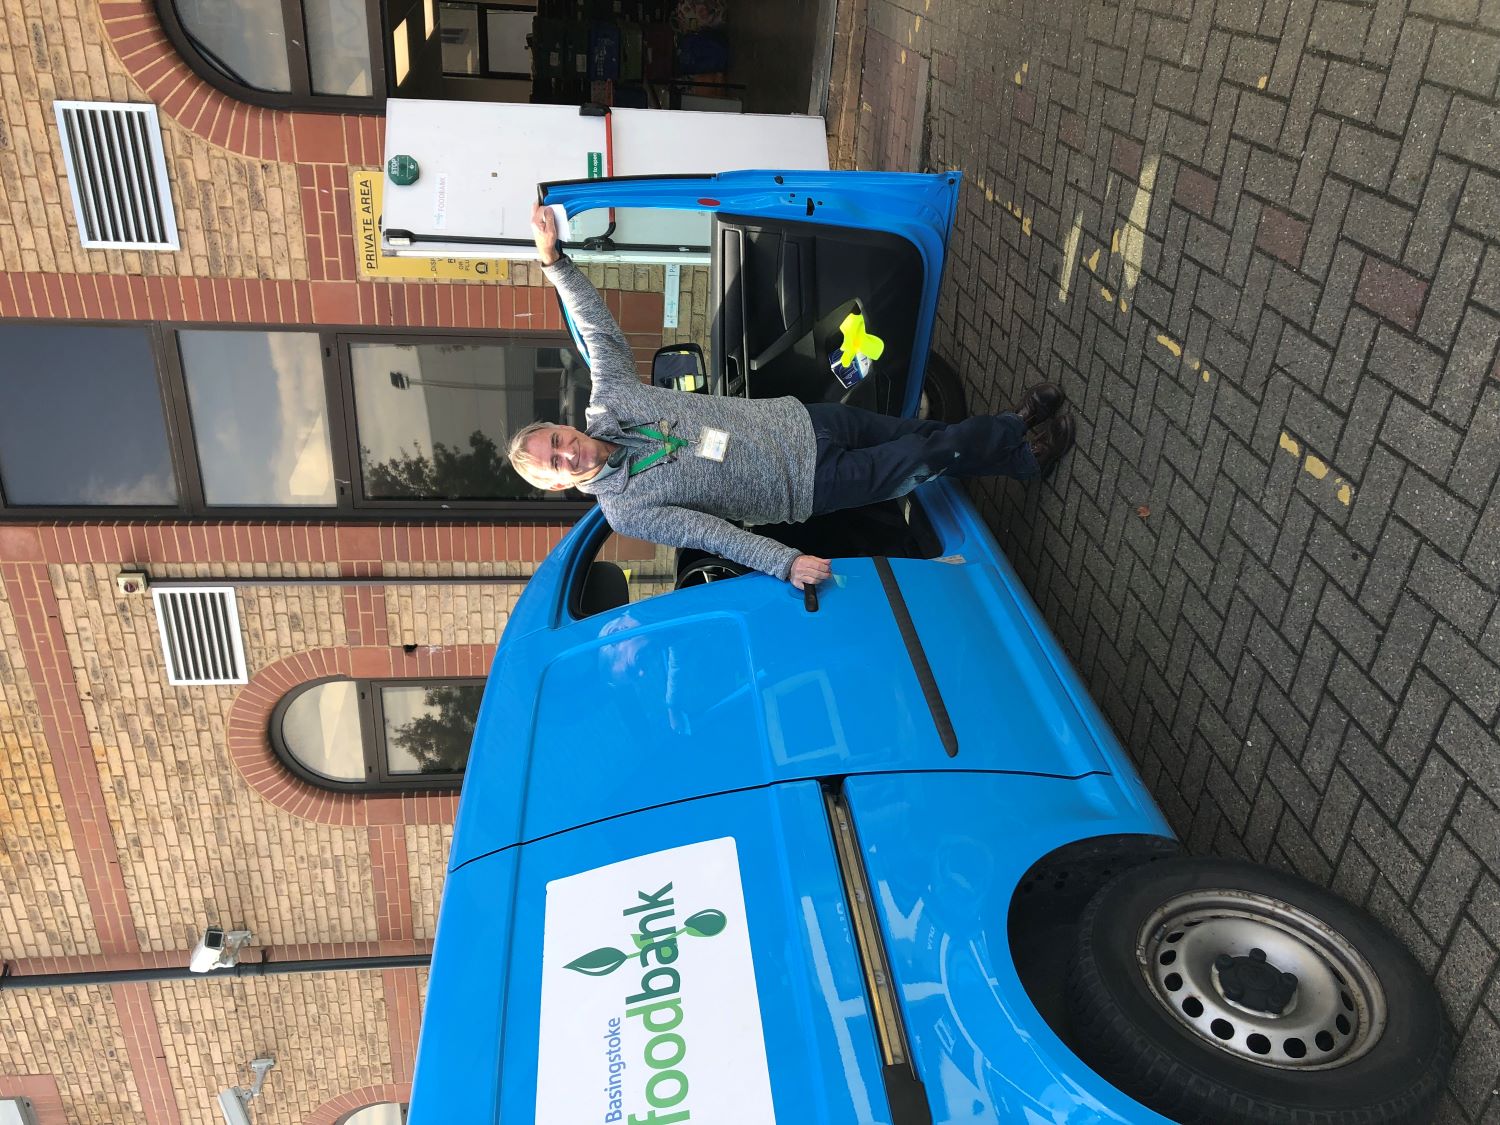 Our foodbank van and Geoff, store manager